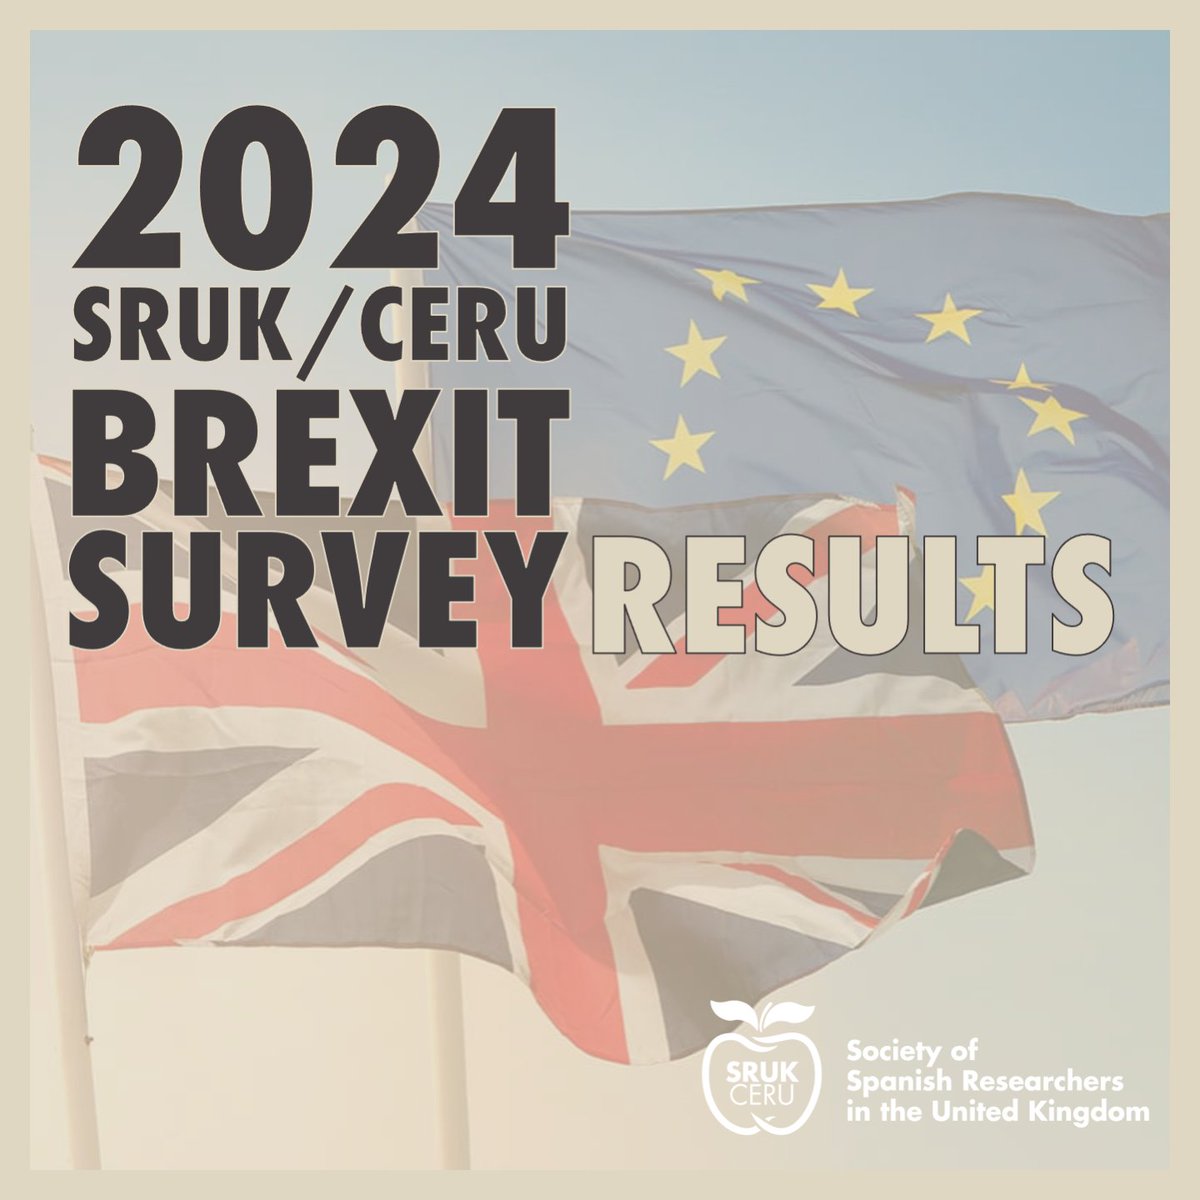 On the occasion of #EuropeDay 🇪🇺, we are releasing the results of the 2024 SRUK/CERU Brexit Survey, led by our Science Policy Department a few weeks ago. The findings will also contribute to the broader conversation on the evolving relationship between 🇪🇸and 🇬🇧after Brexit. ⬇️🧵